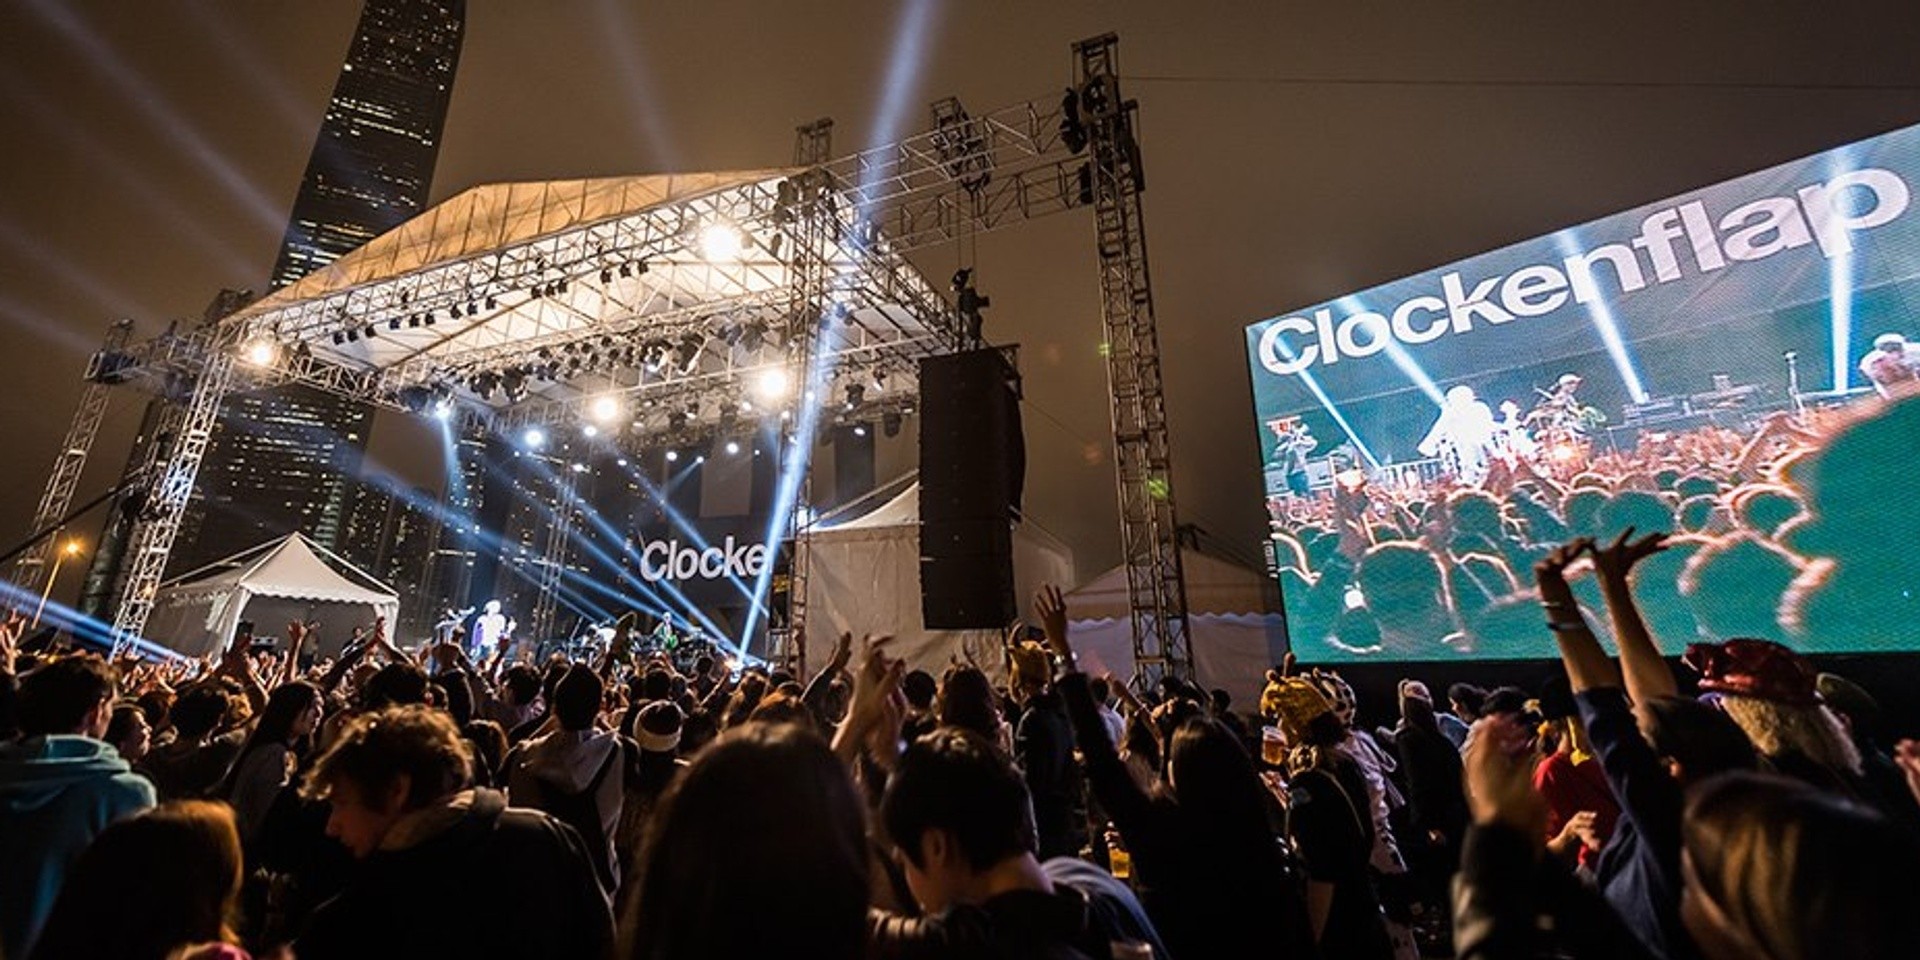 Hong Kong's Clockenflap Festival to return this year, tickets now available